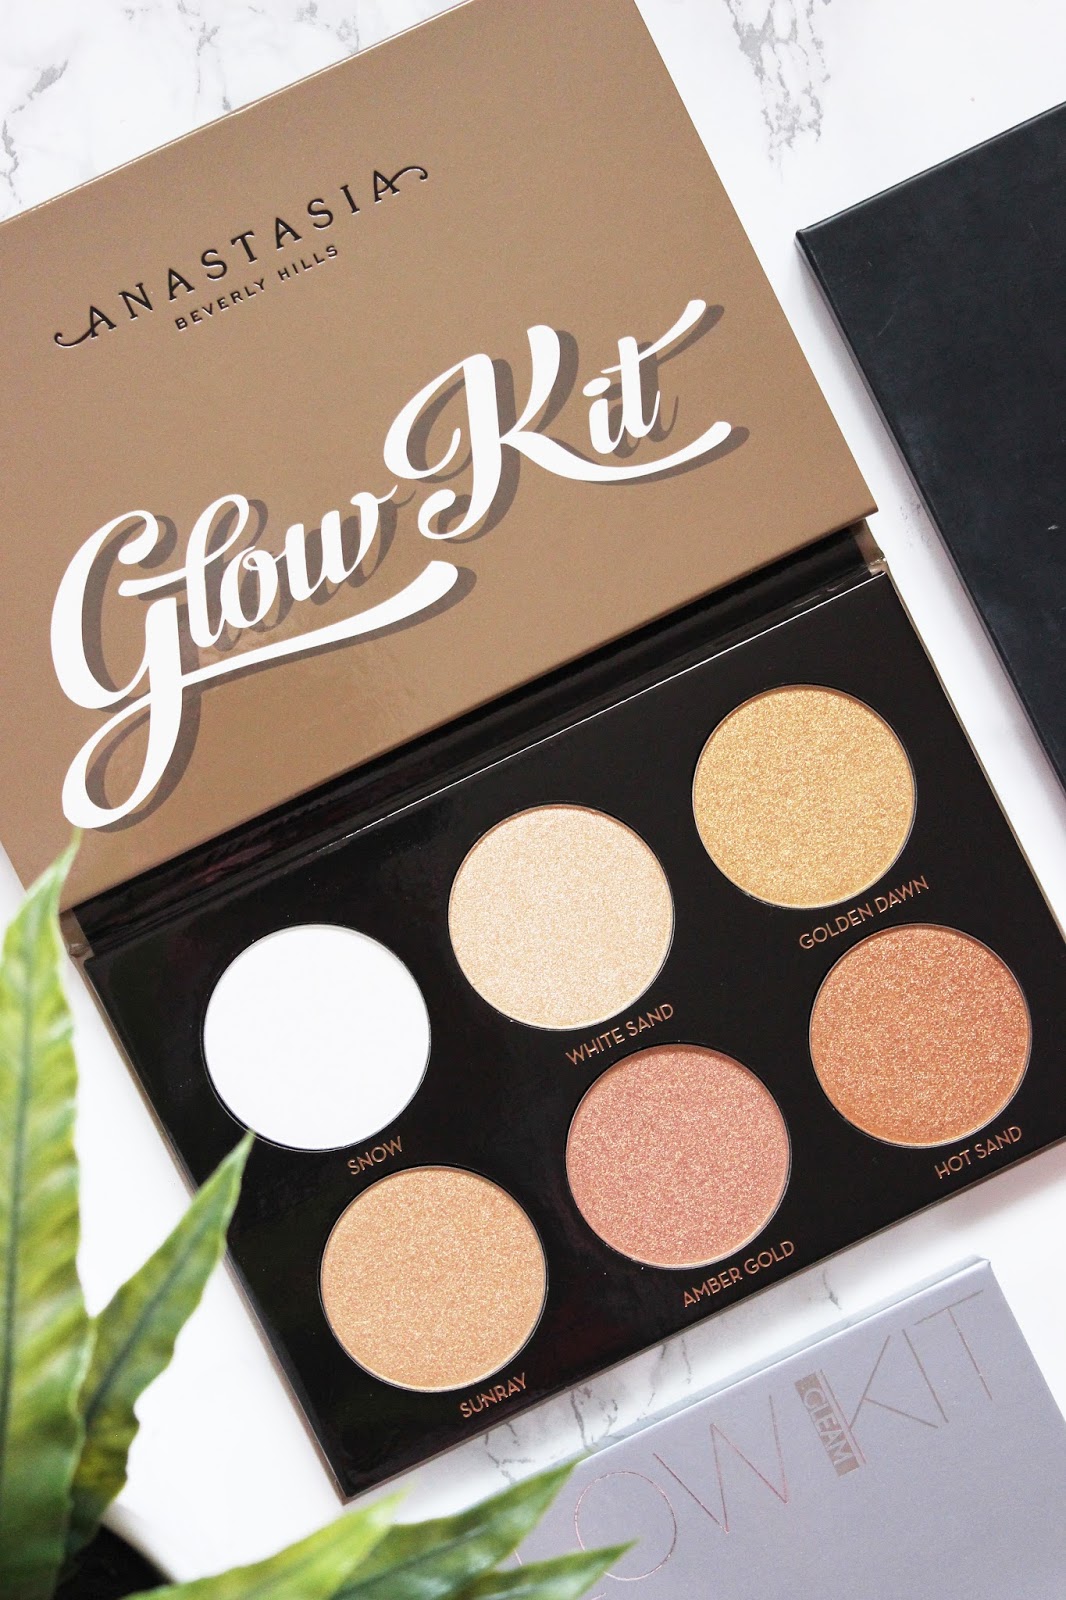 Anastasia Beverly Hills Ultimate Glow Kit | Review & Swatches